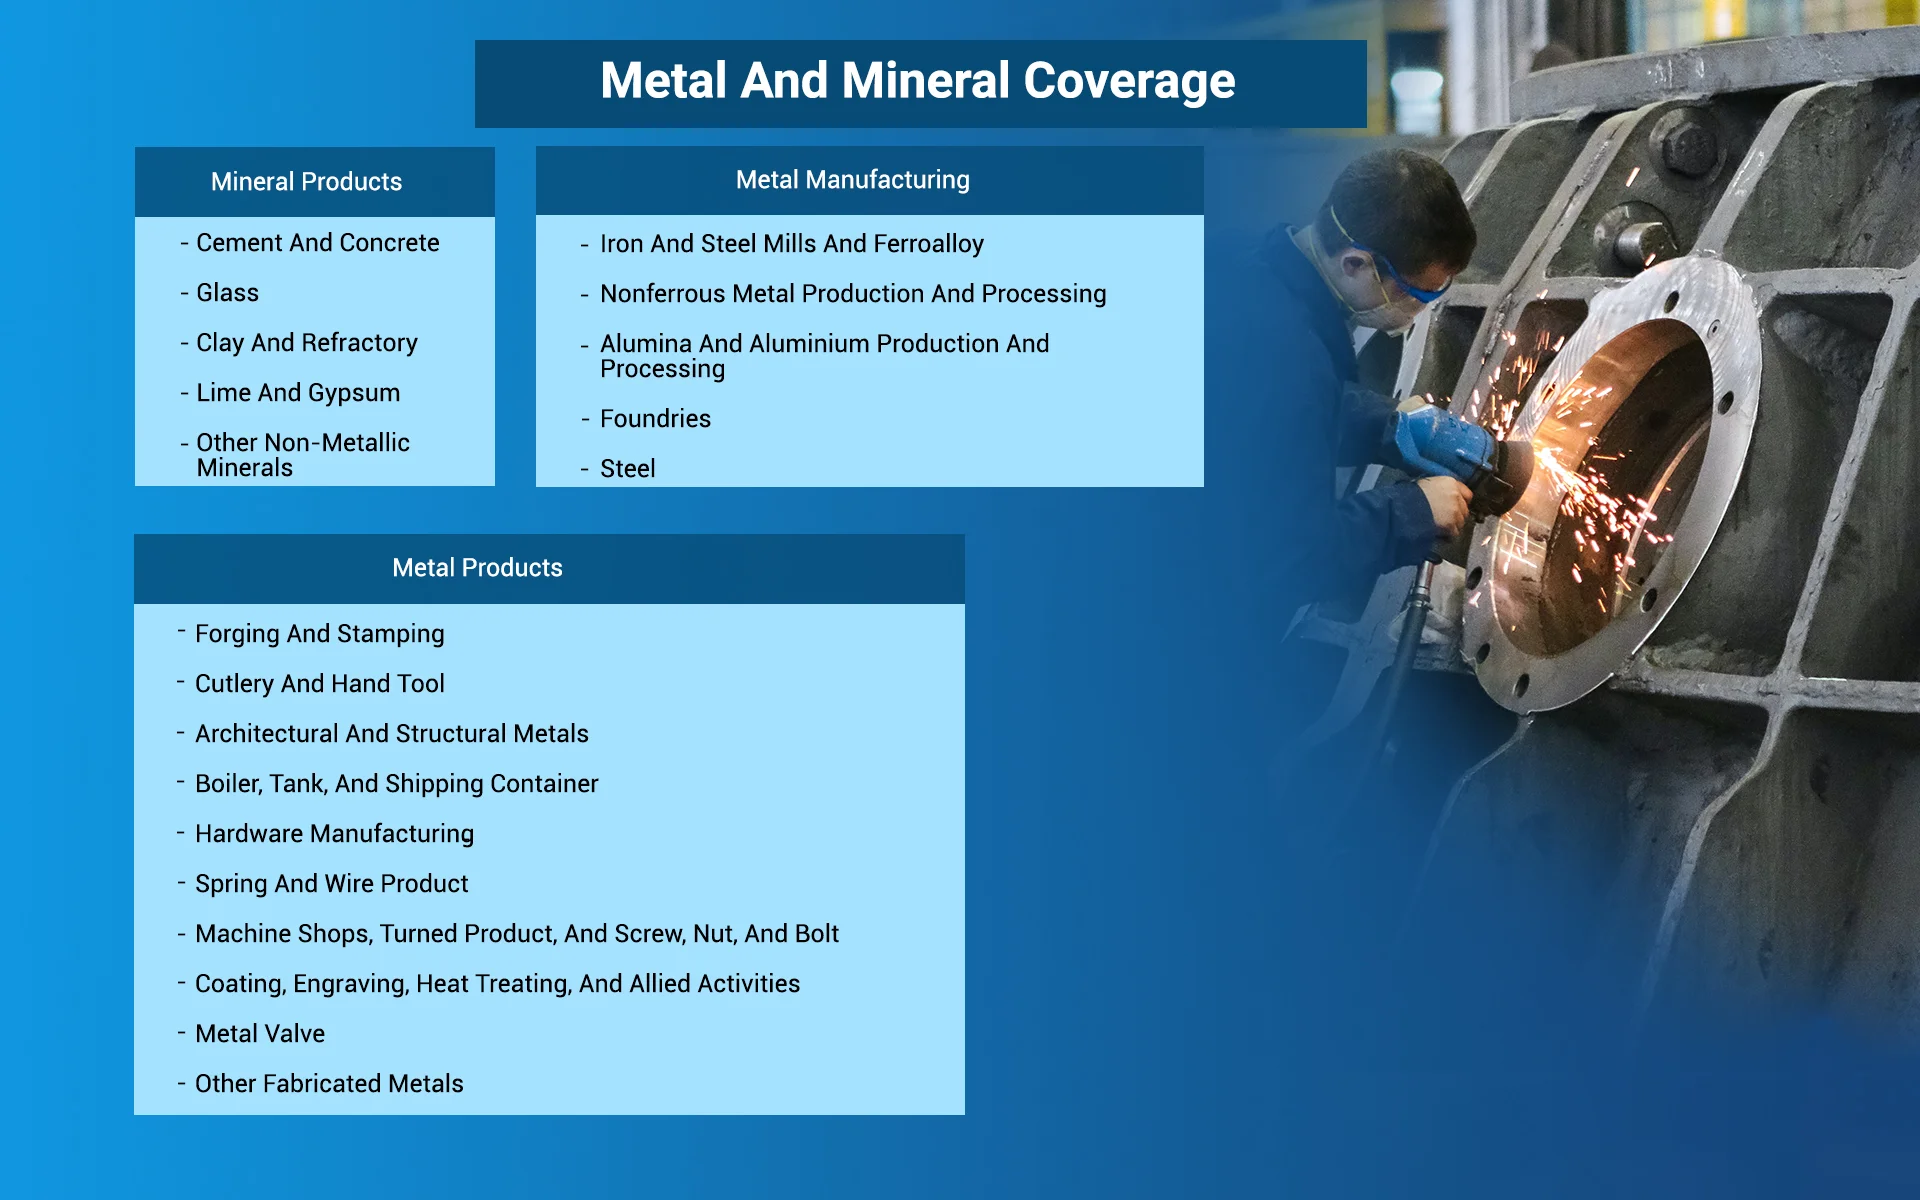 Metal and Mineral Coverage